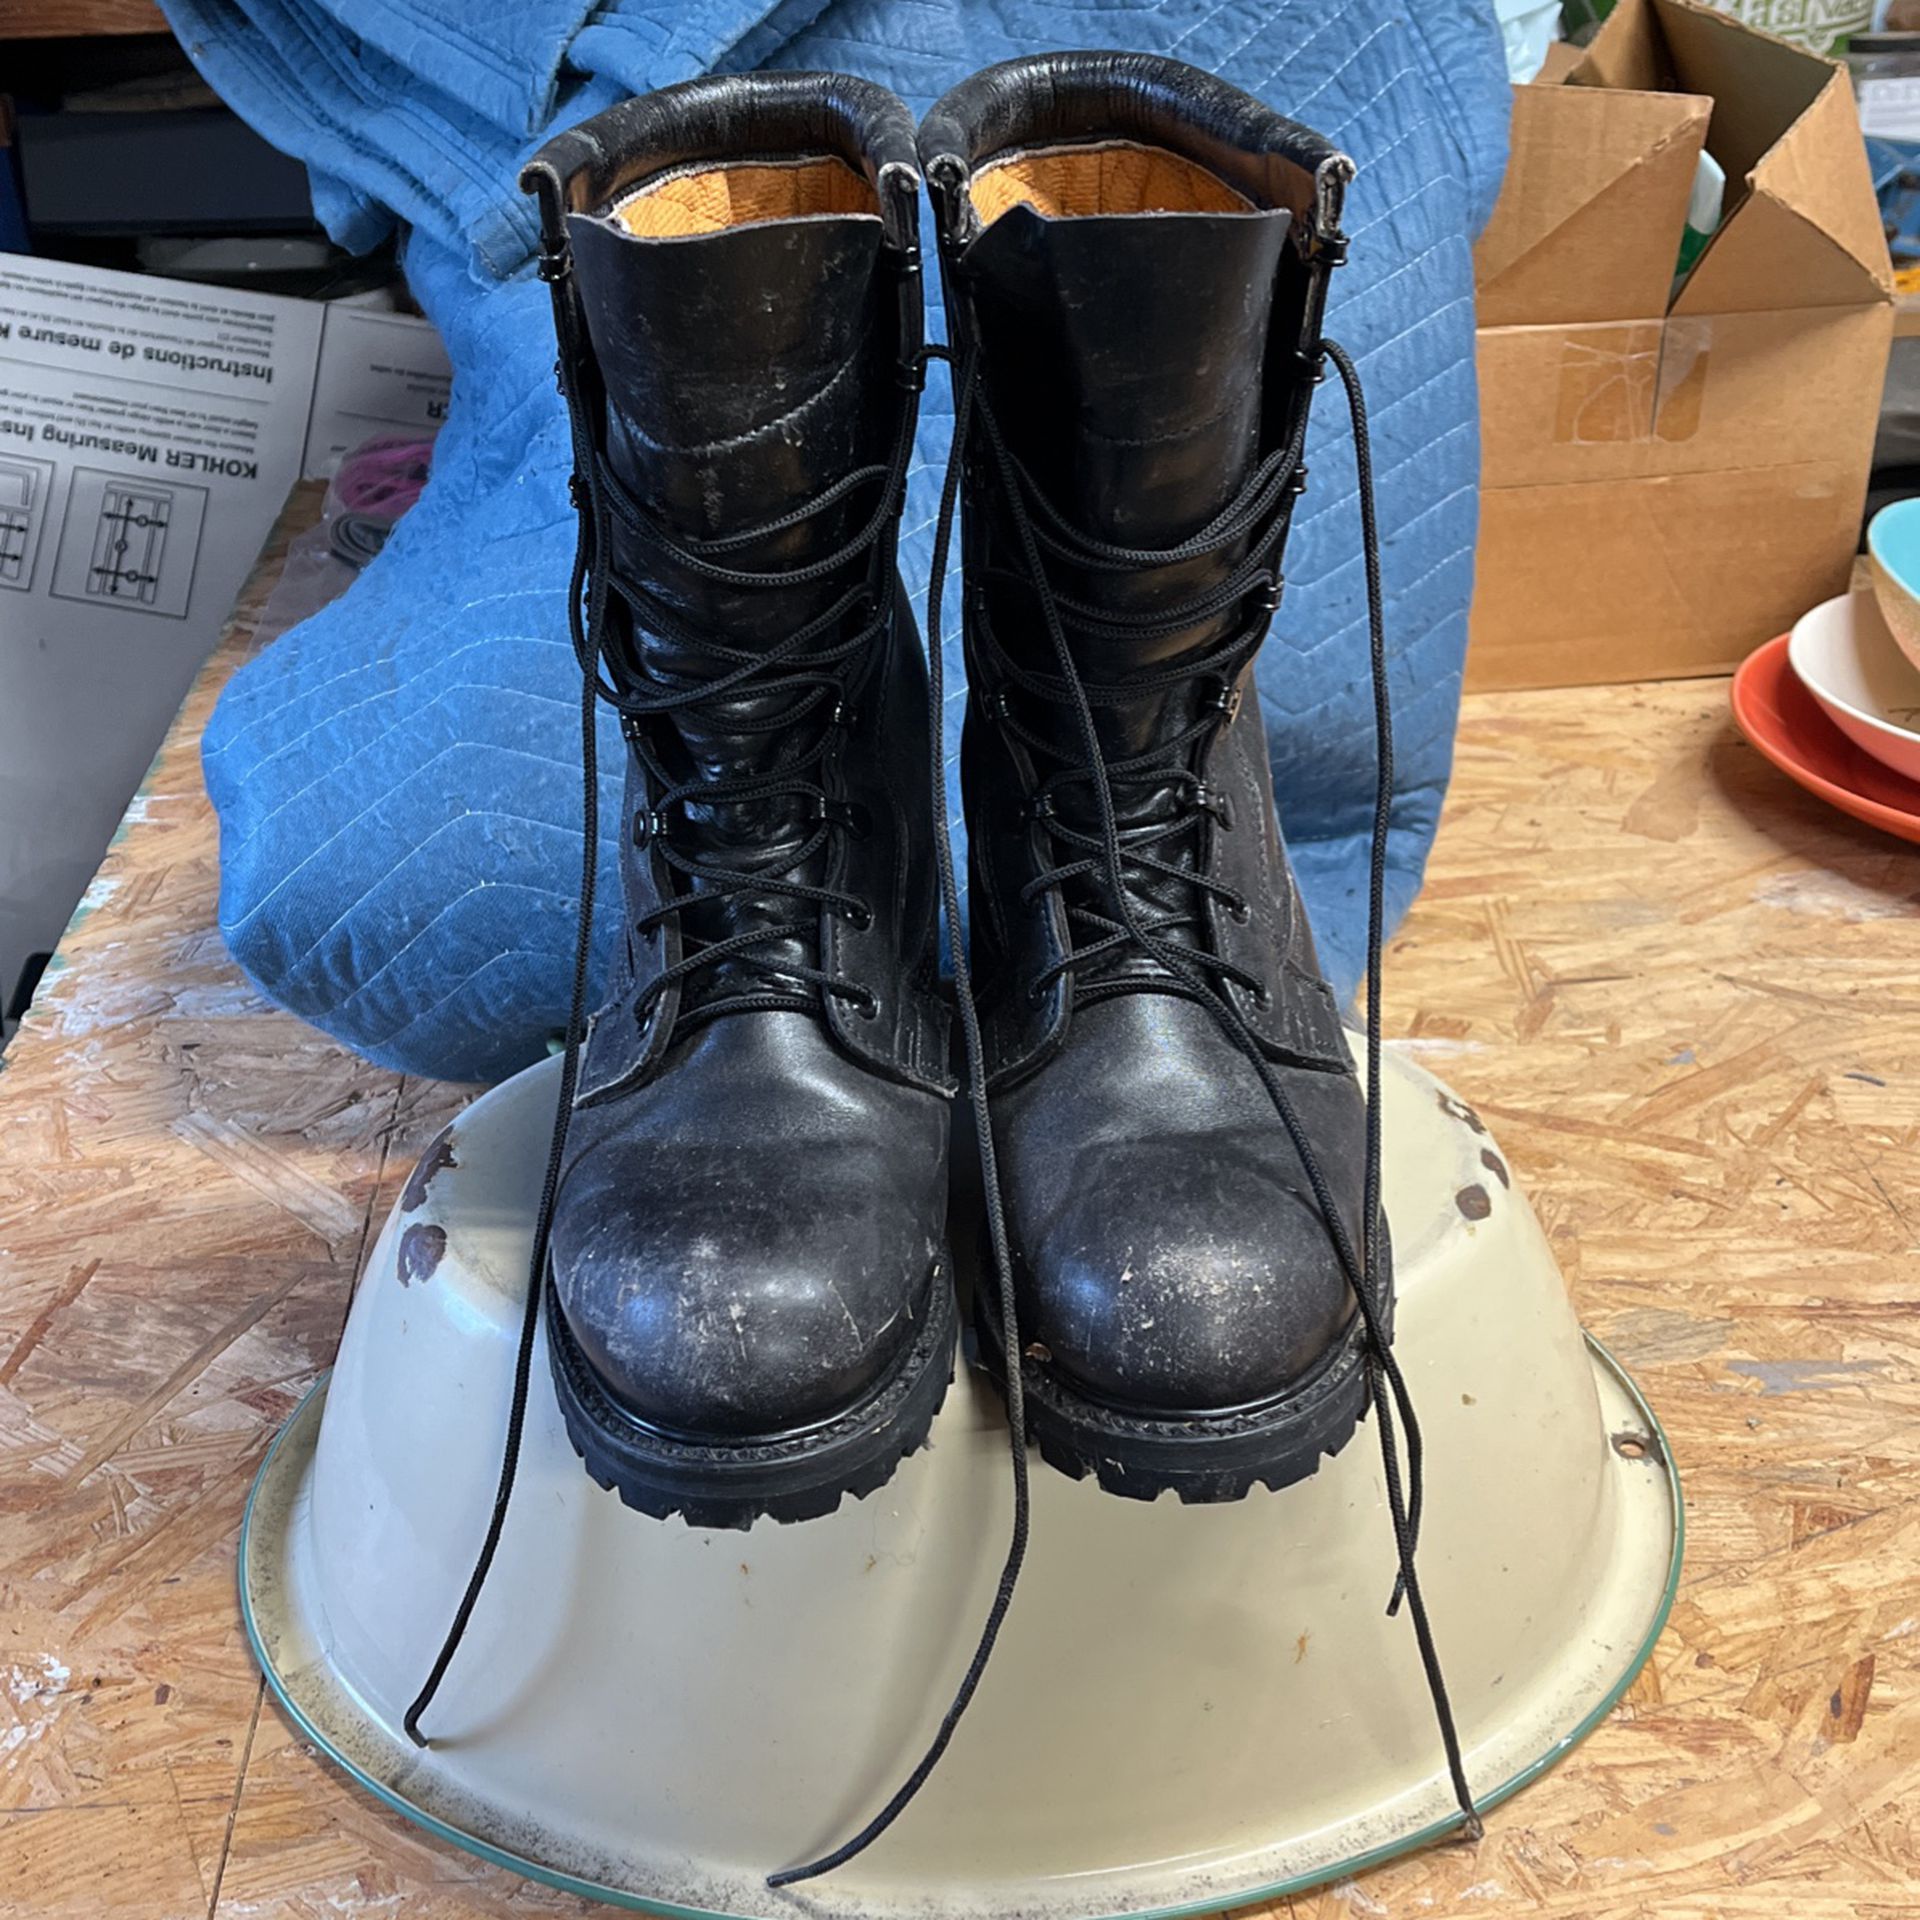 Black Boots - Size 8 Reg - Steel Toes